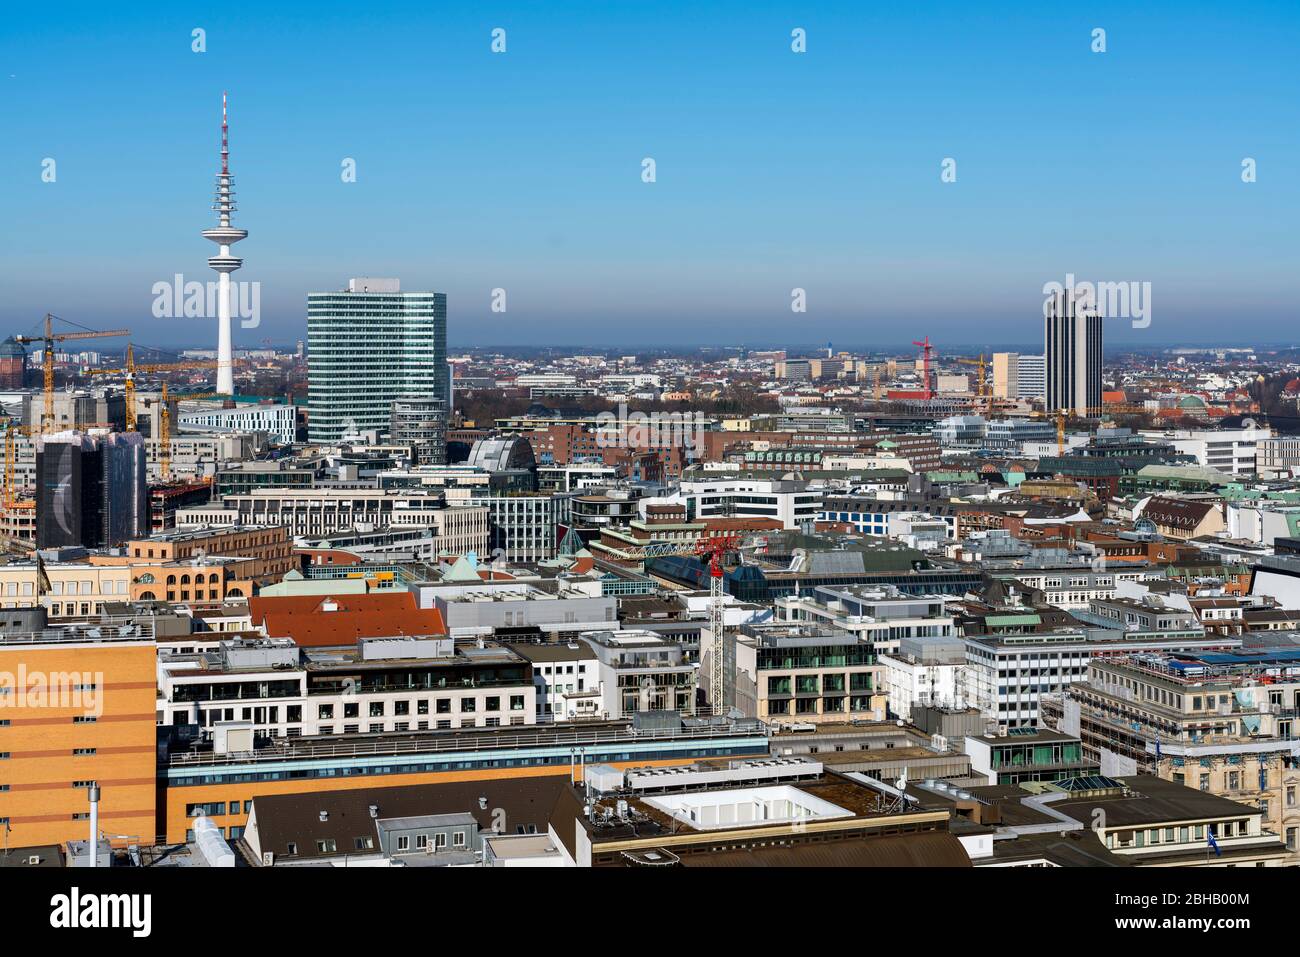 Germany, Hamburg, view from the tower of the church ruin St. Nikolai to the Heinrich Hertz tower, the 279.2 m high television tower, which Hamburg also call Telemichel. Stock Photo